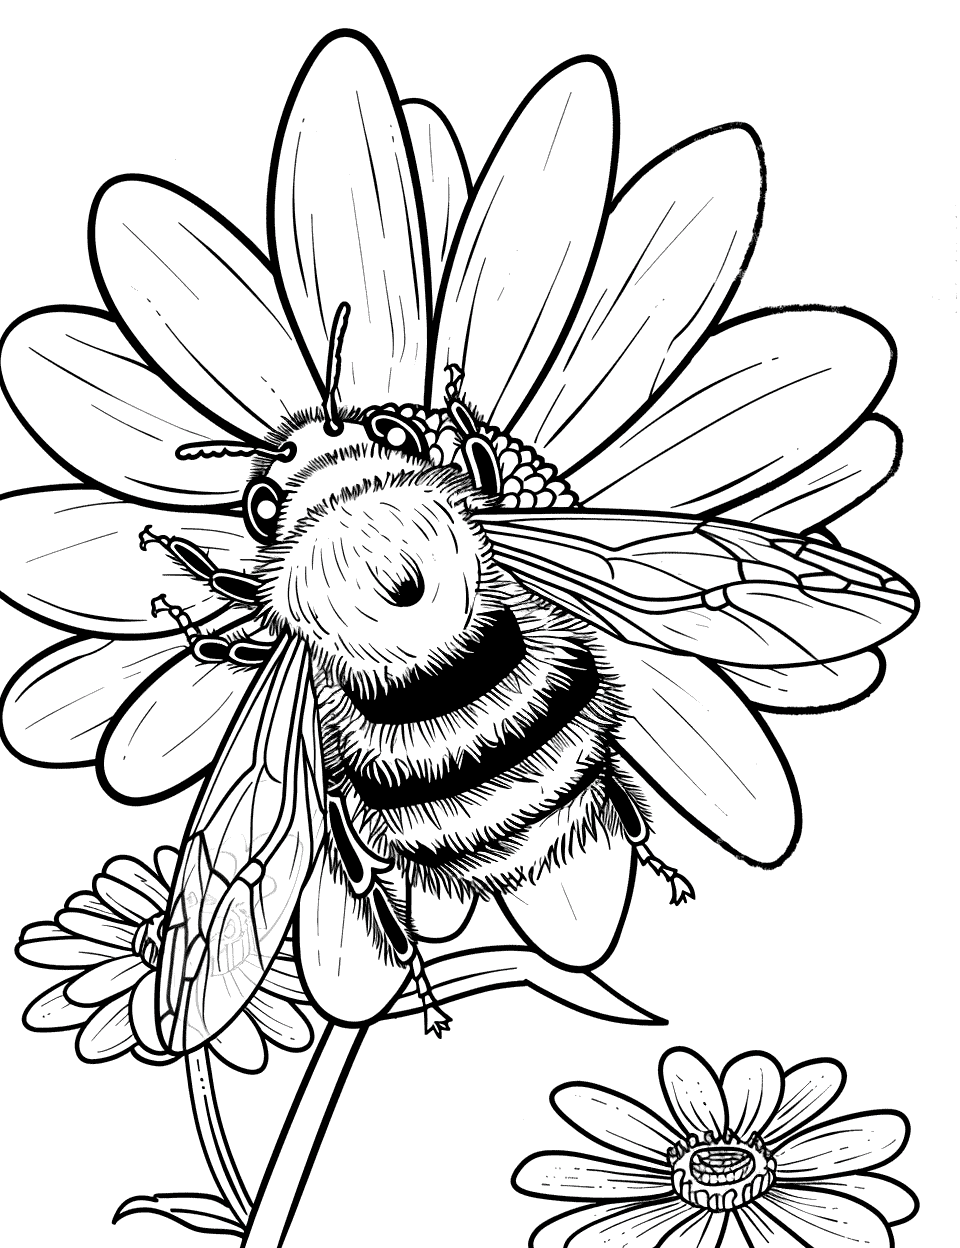 Bumble Bee on a Daisy Coloring Page - A bumble bee landing on the bright petals of a daisy in a garden.